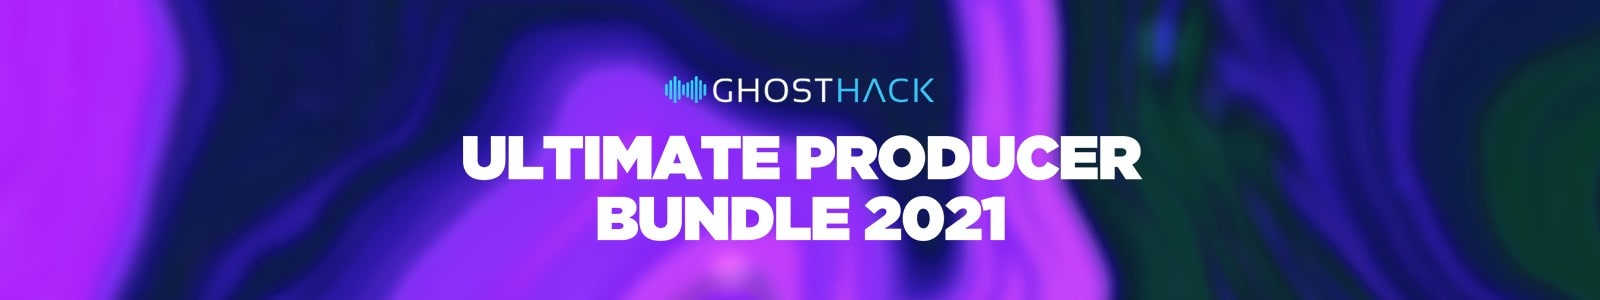 Ultimate Producer Bundle 2021 by Ghosthack